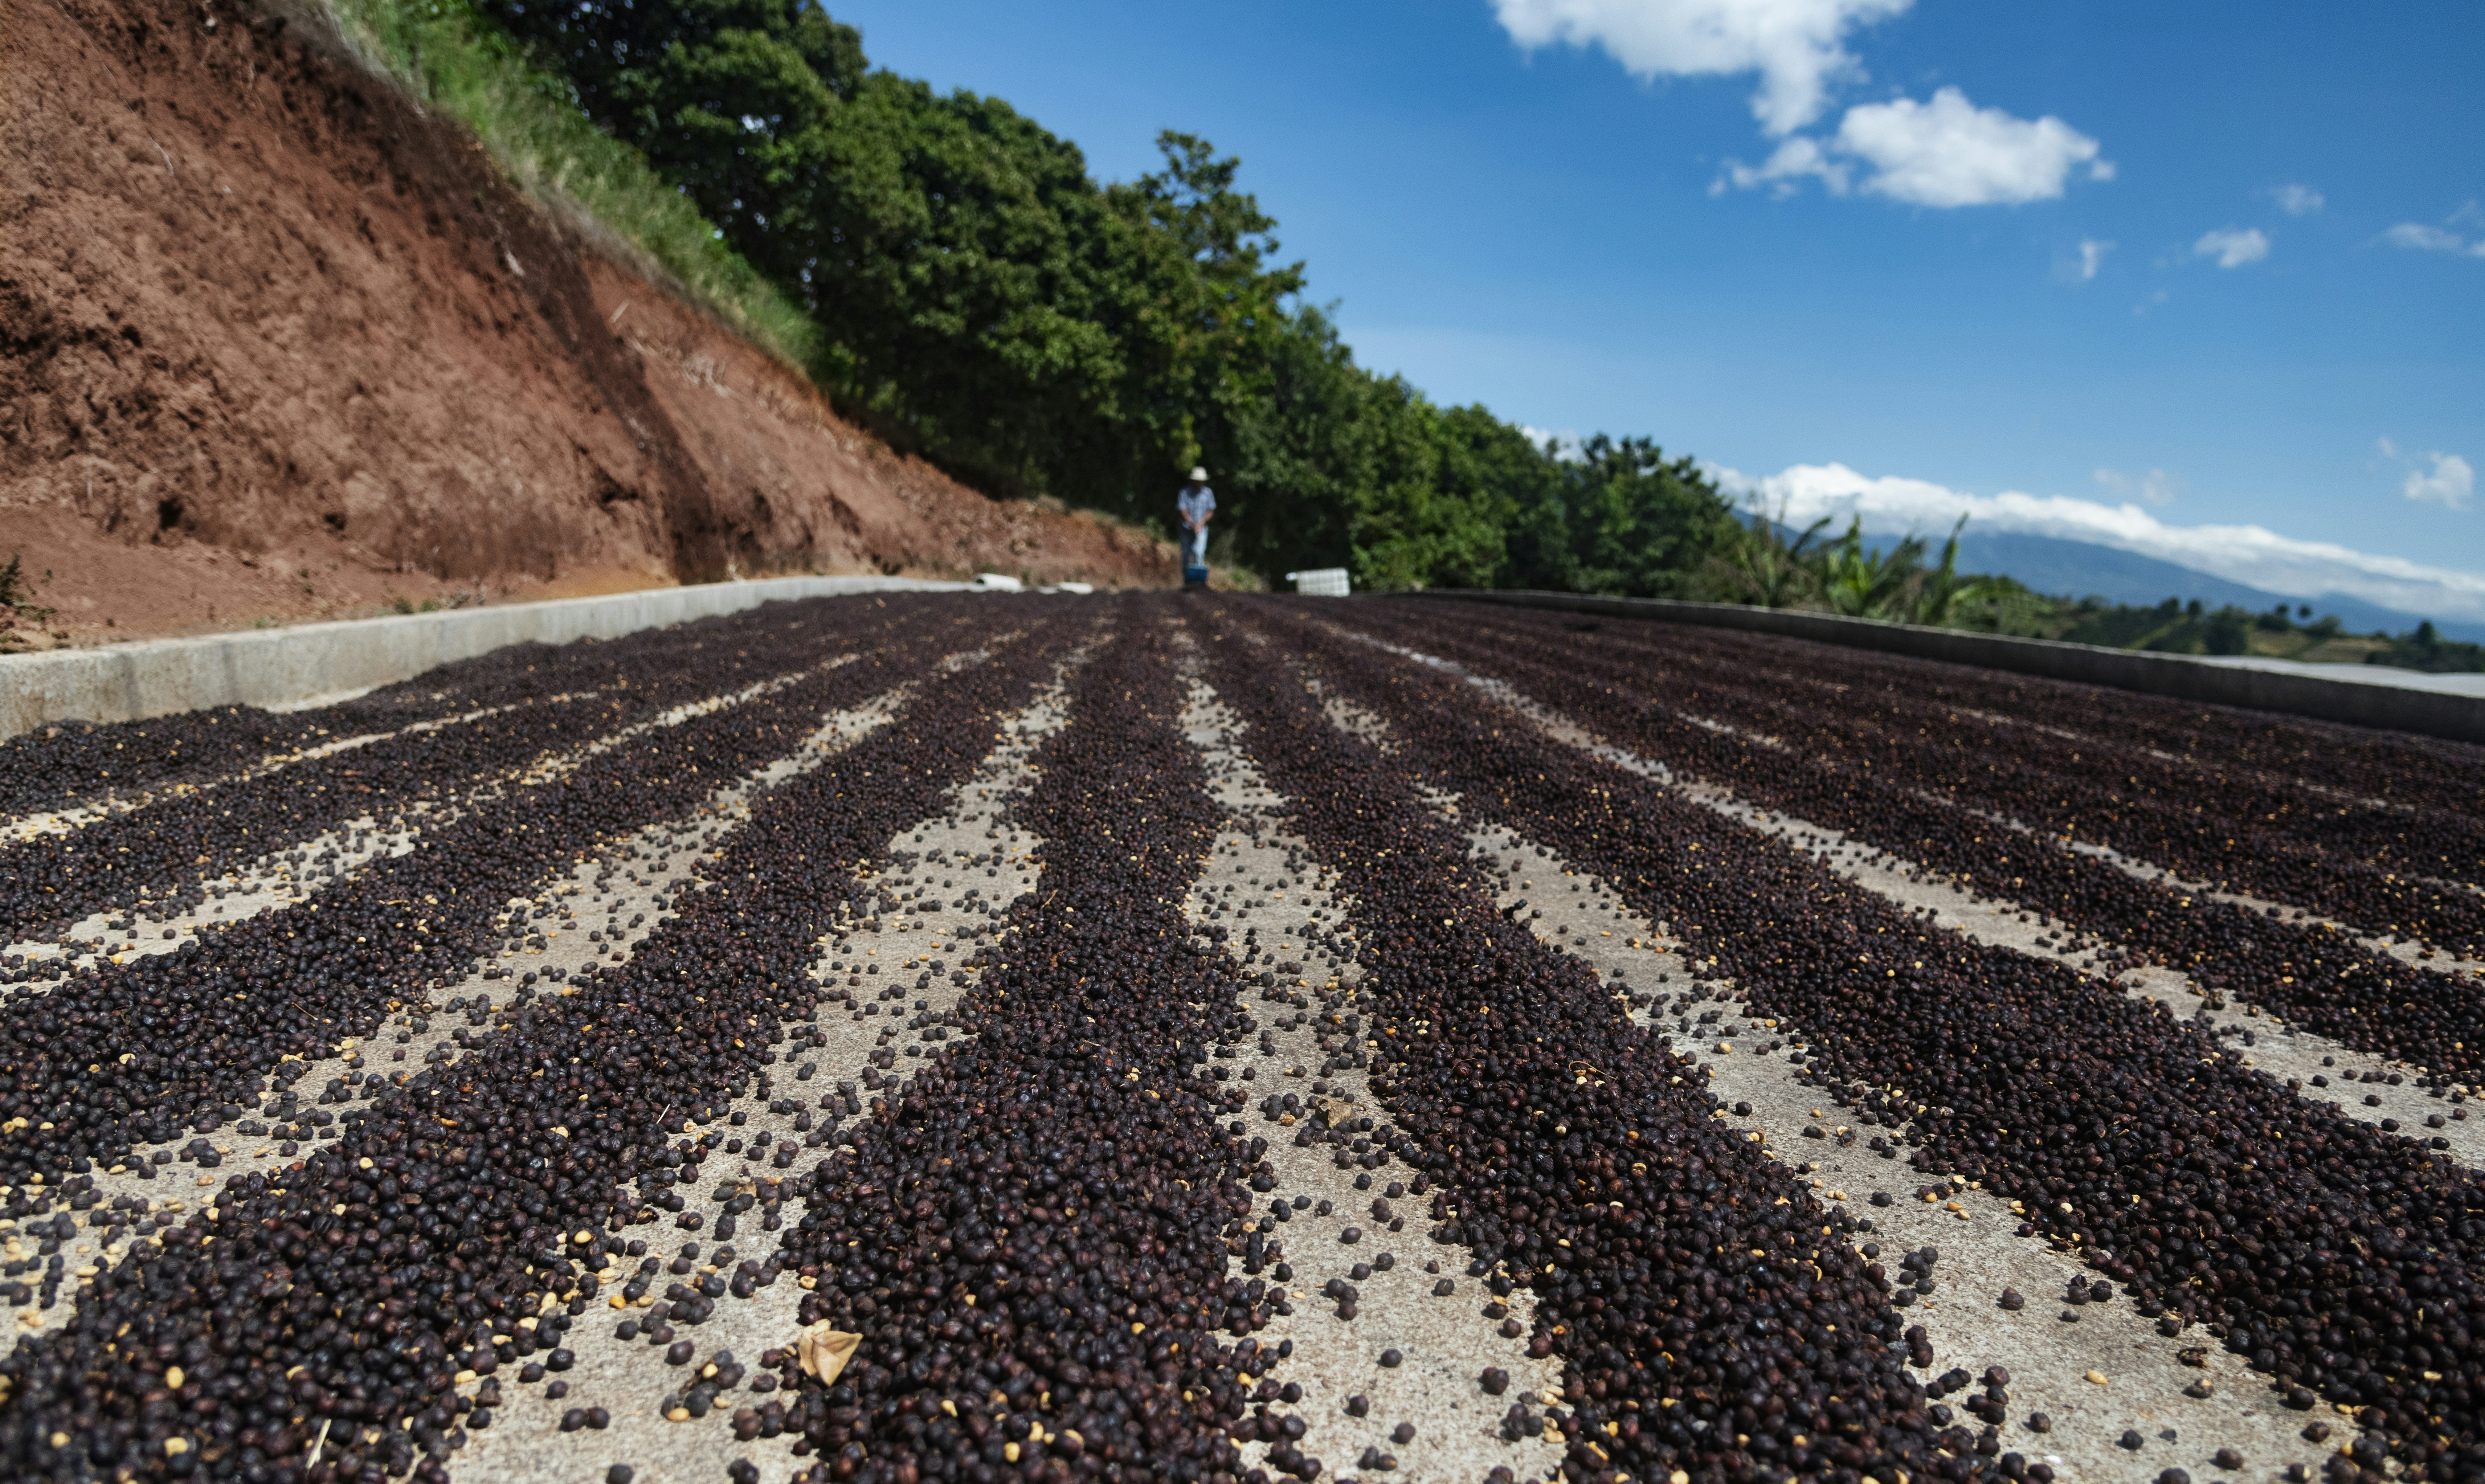 Rows of coffee beans dry on a concrete surface in Costa Rica. 